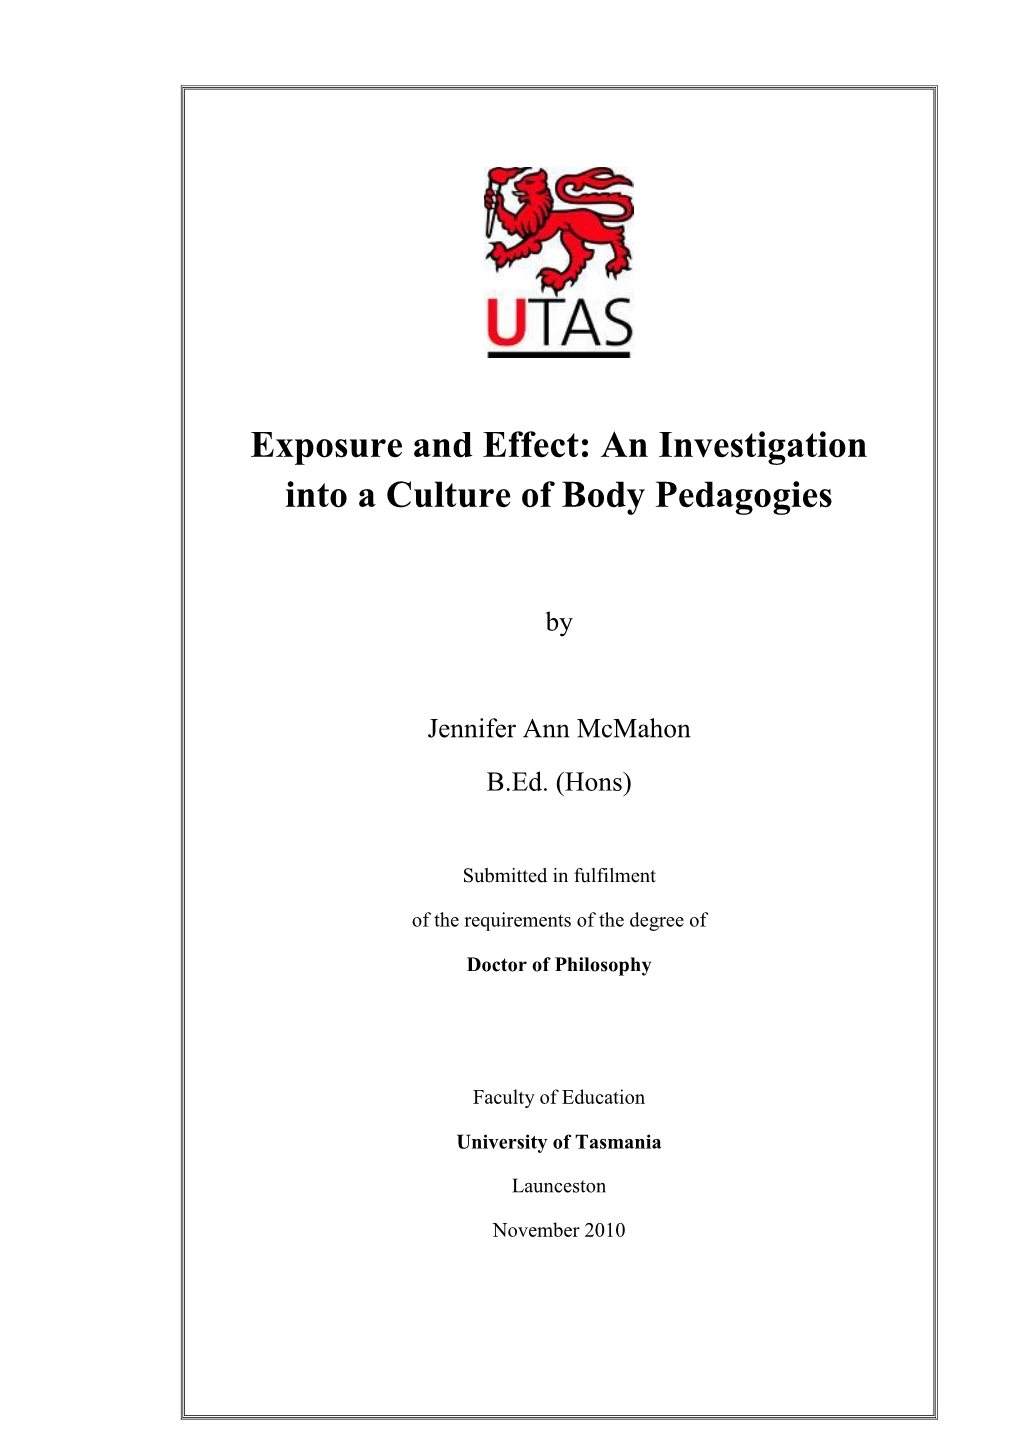 Exposure and Effect: an Investigation Into a Culture of Body Pedagogies